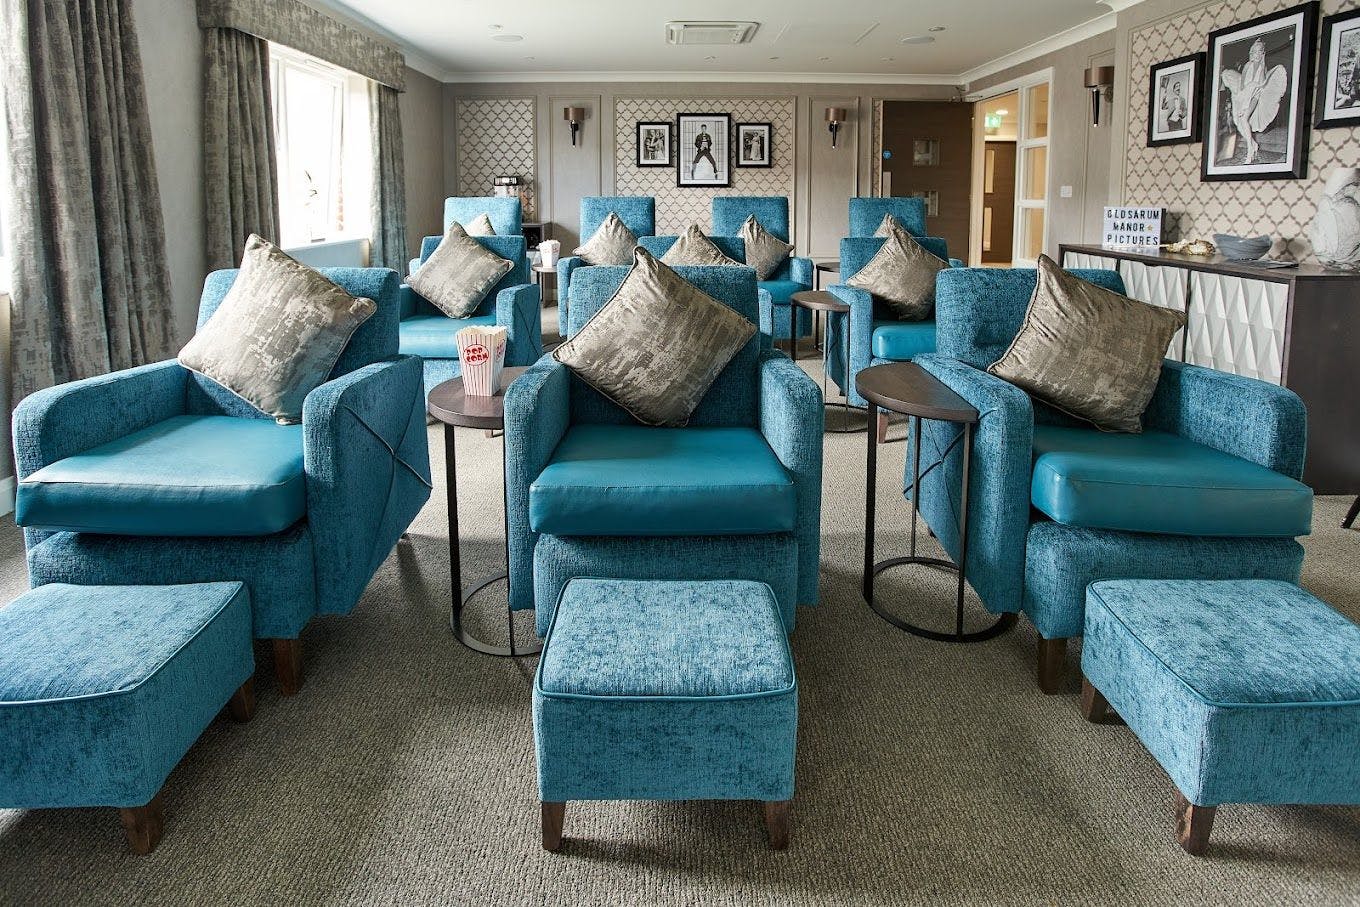 Cinema of Nodens Manor care home in Lydney, Gloucestershire